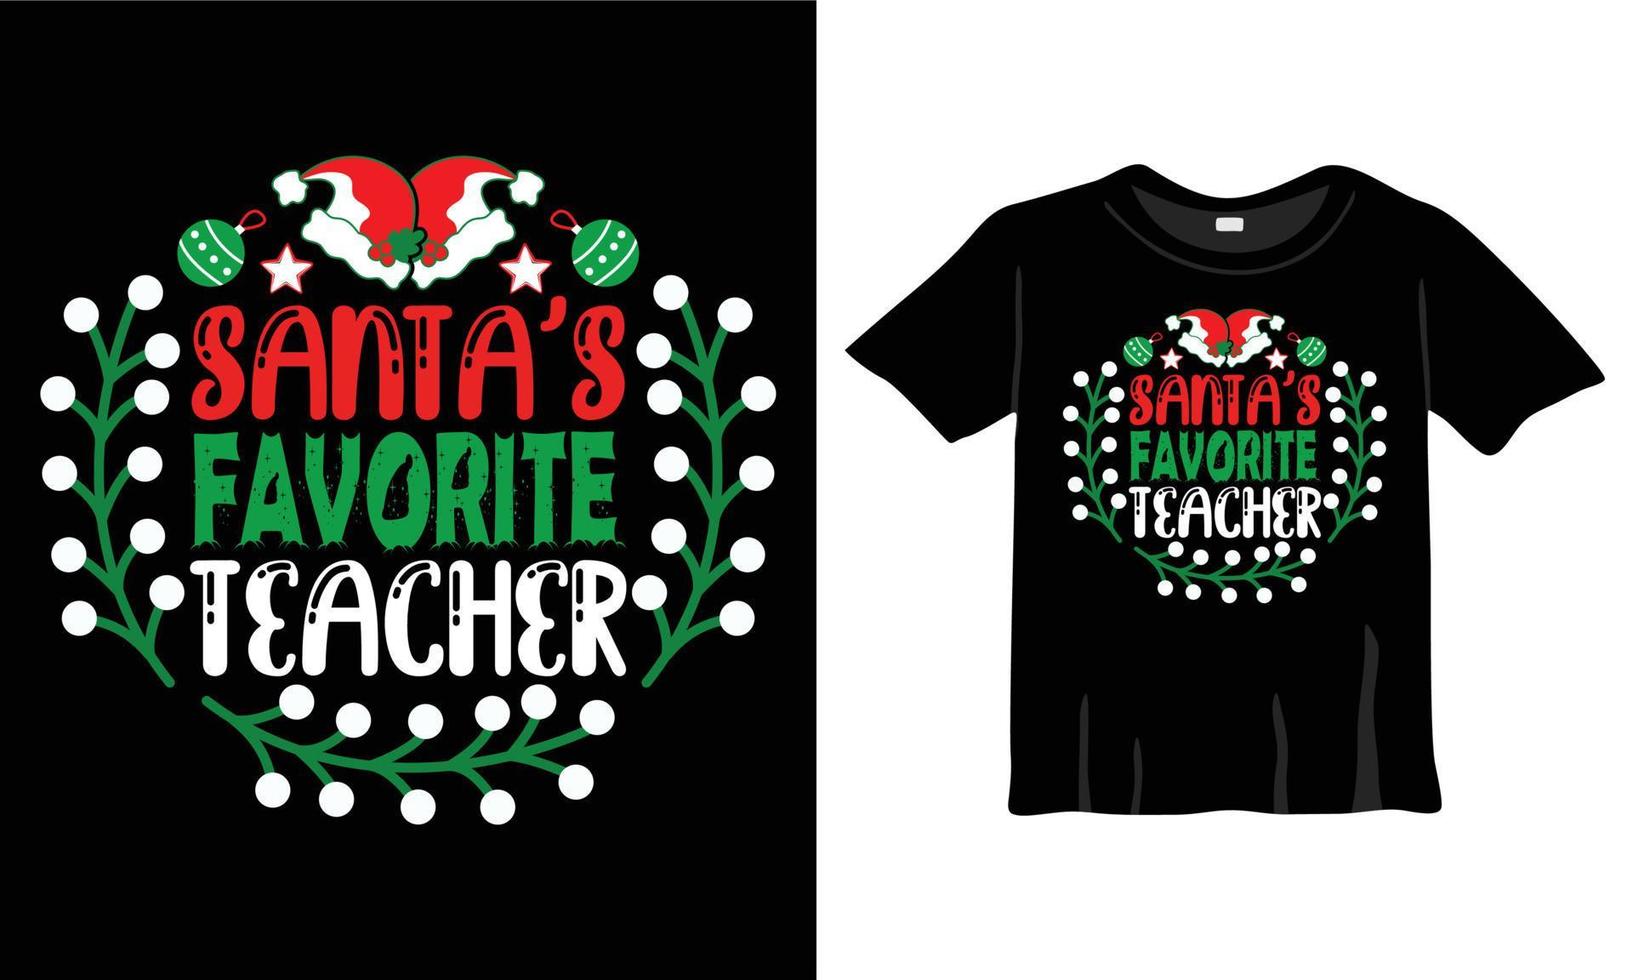 Santa's Favorite Teacher Christmas T-Shirt Design Template for Christmas Celebration. Greeting cards, t-shirts, mugs, and gifts. For Men, Women, and Baby clothing vector